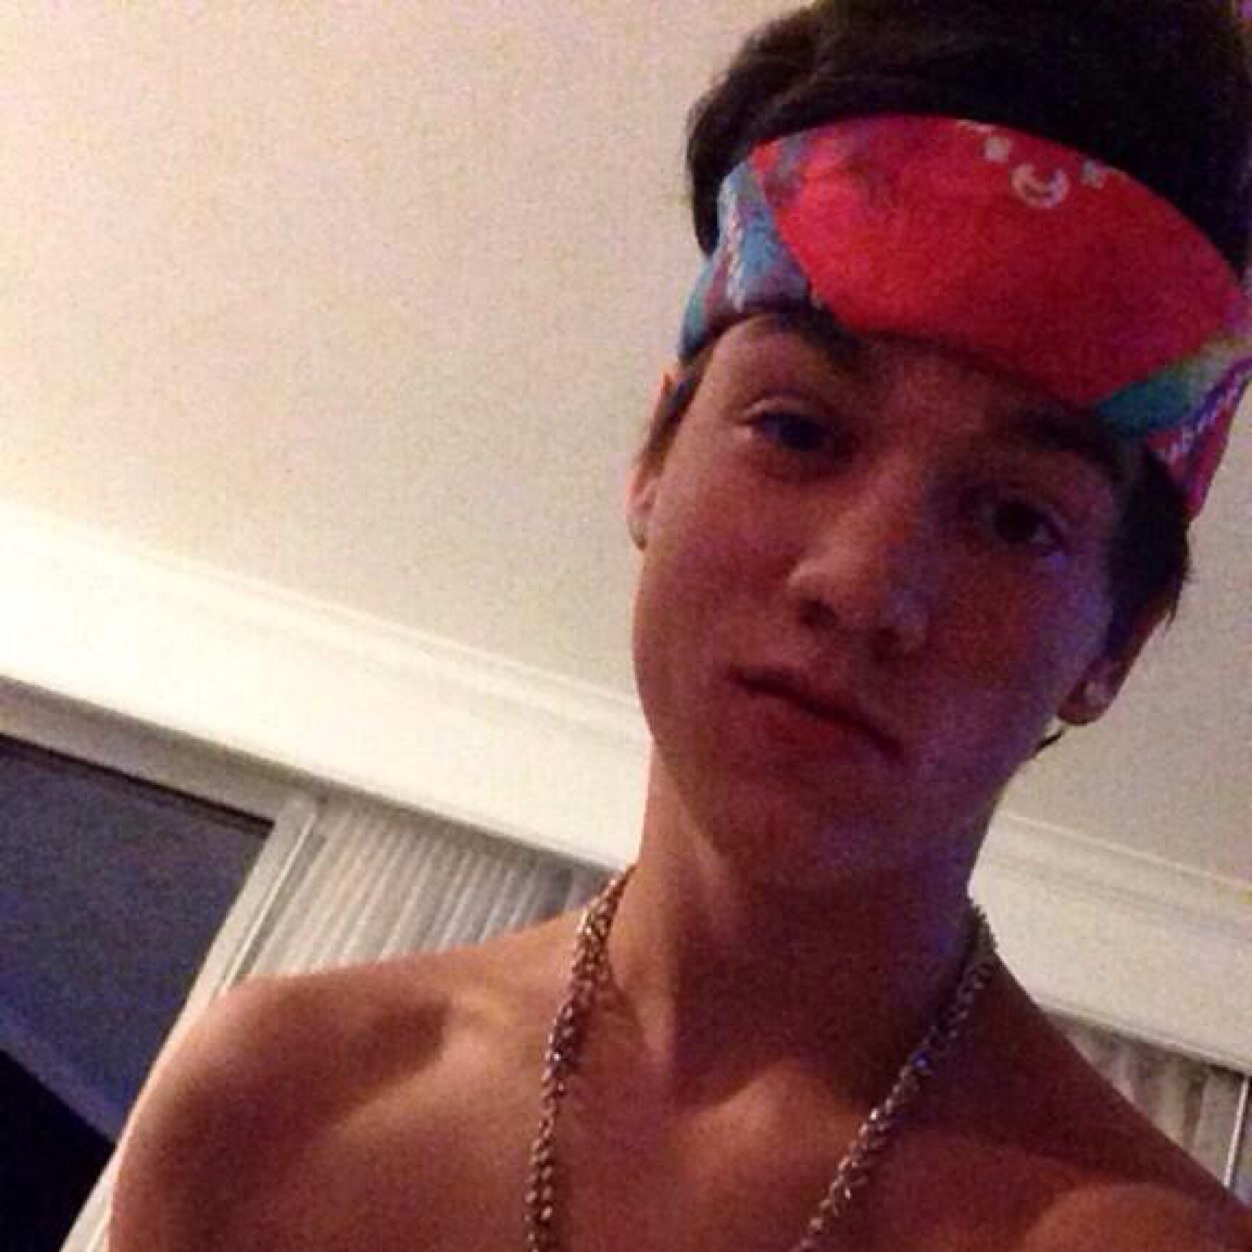 CONGRATS BABE TAYLOR CANIFF FOLLOWED YOU